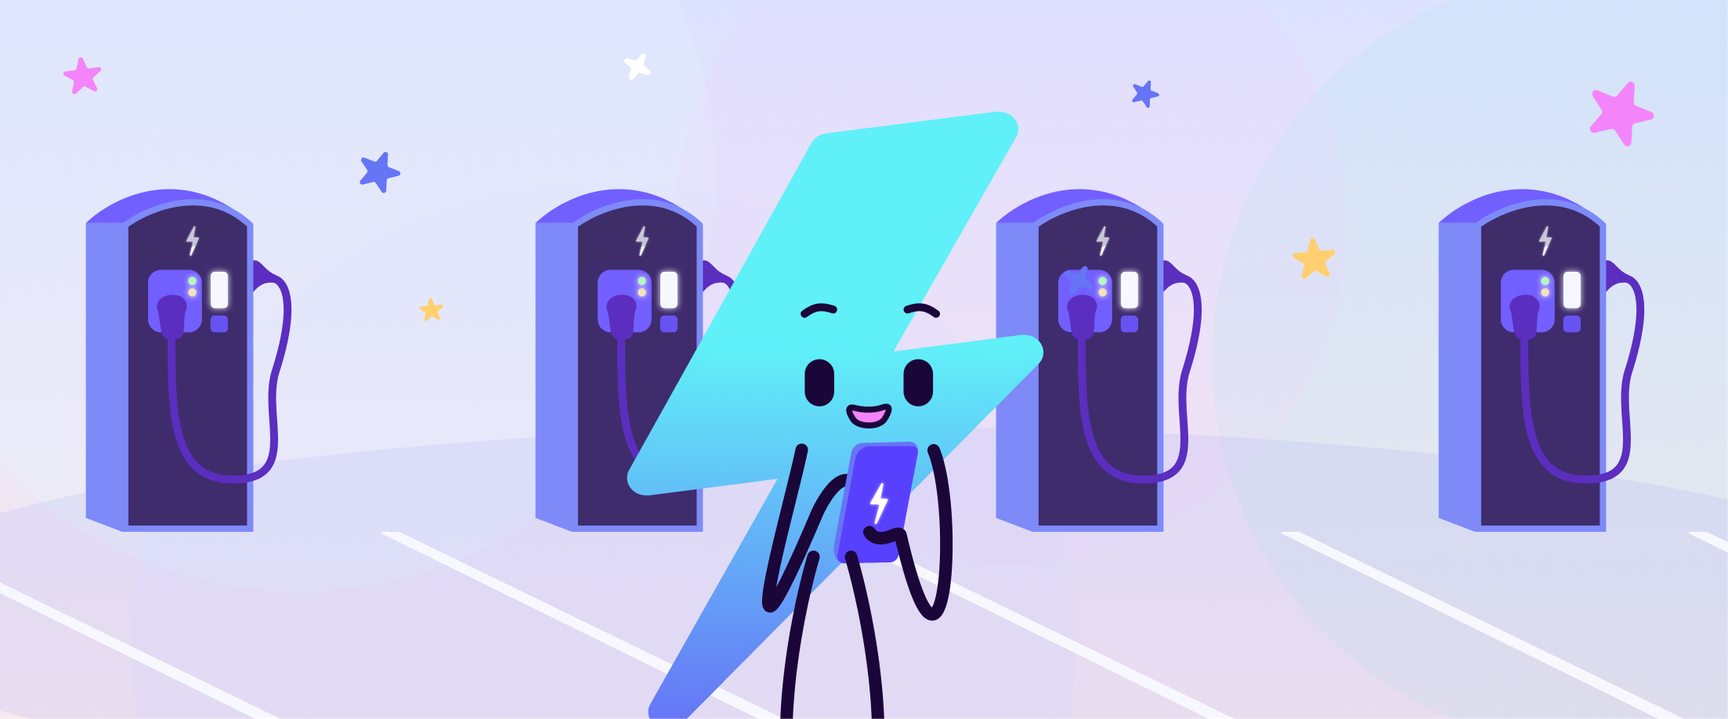 Image shows Octopus Electric Universe mascot, Zapman, using the public charging network to charge EV